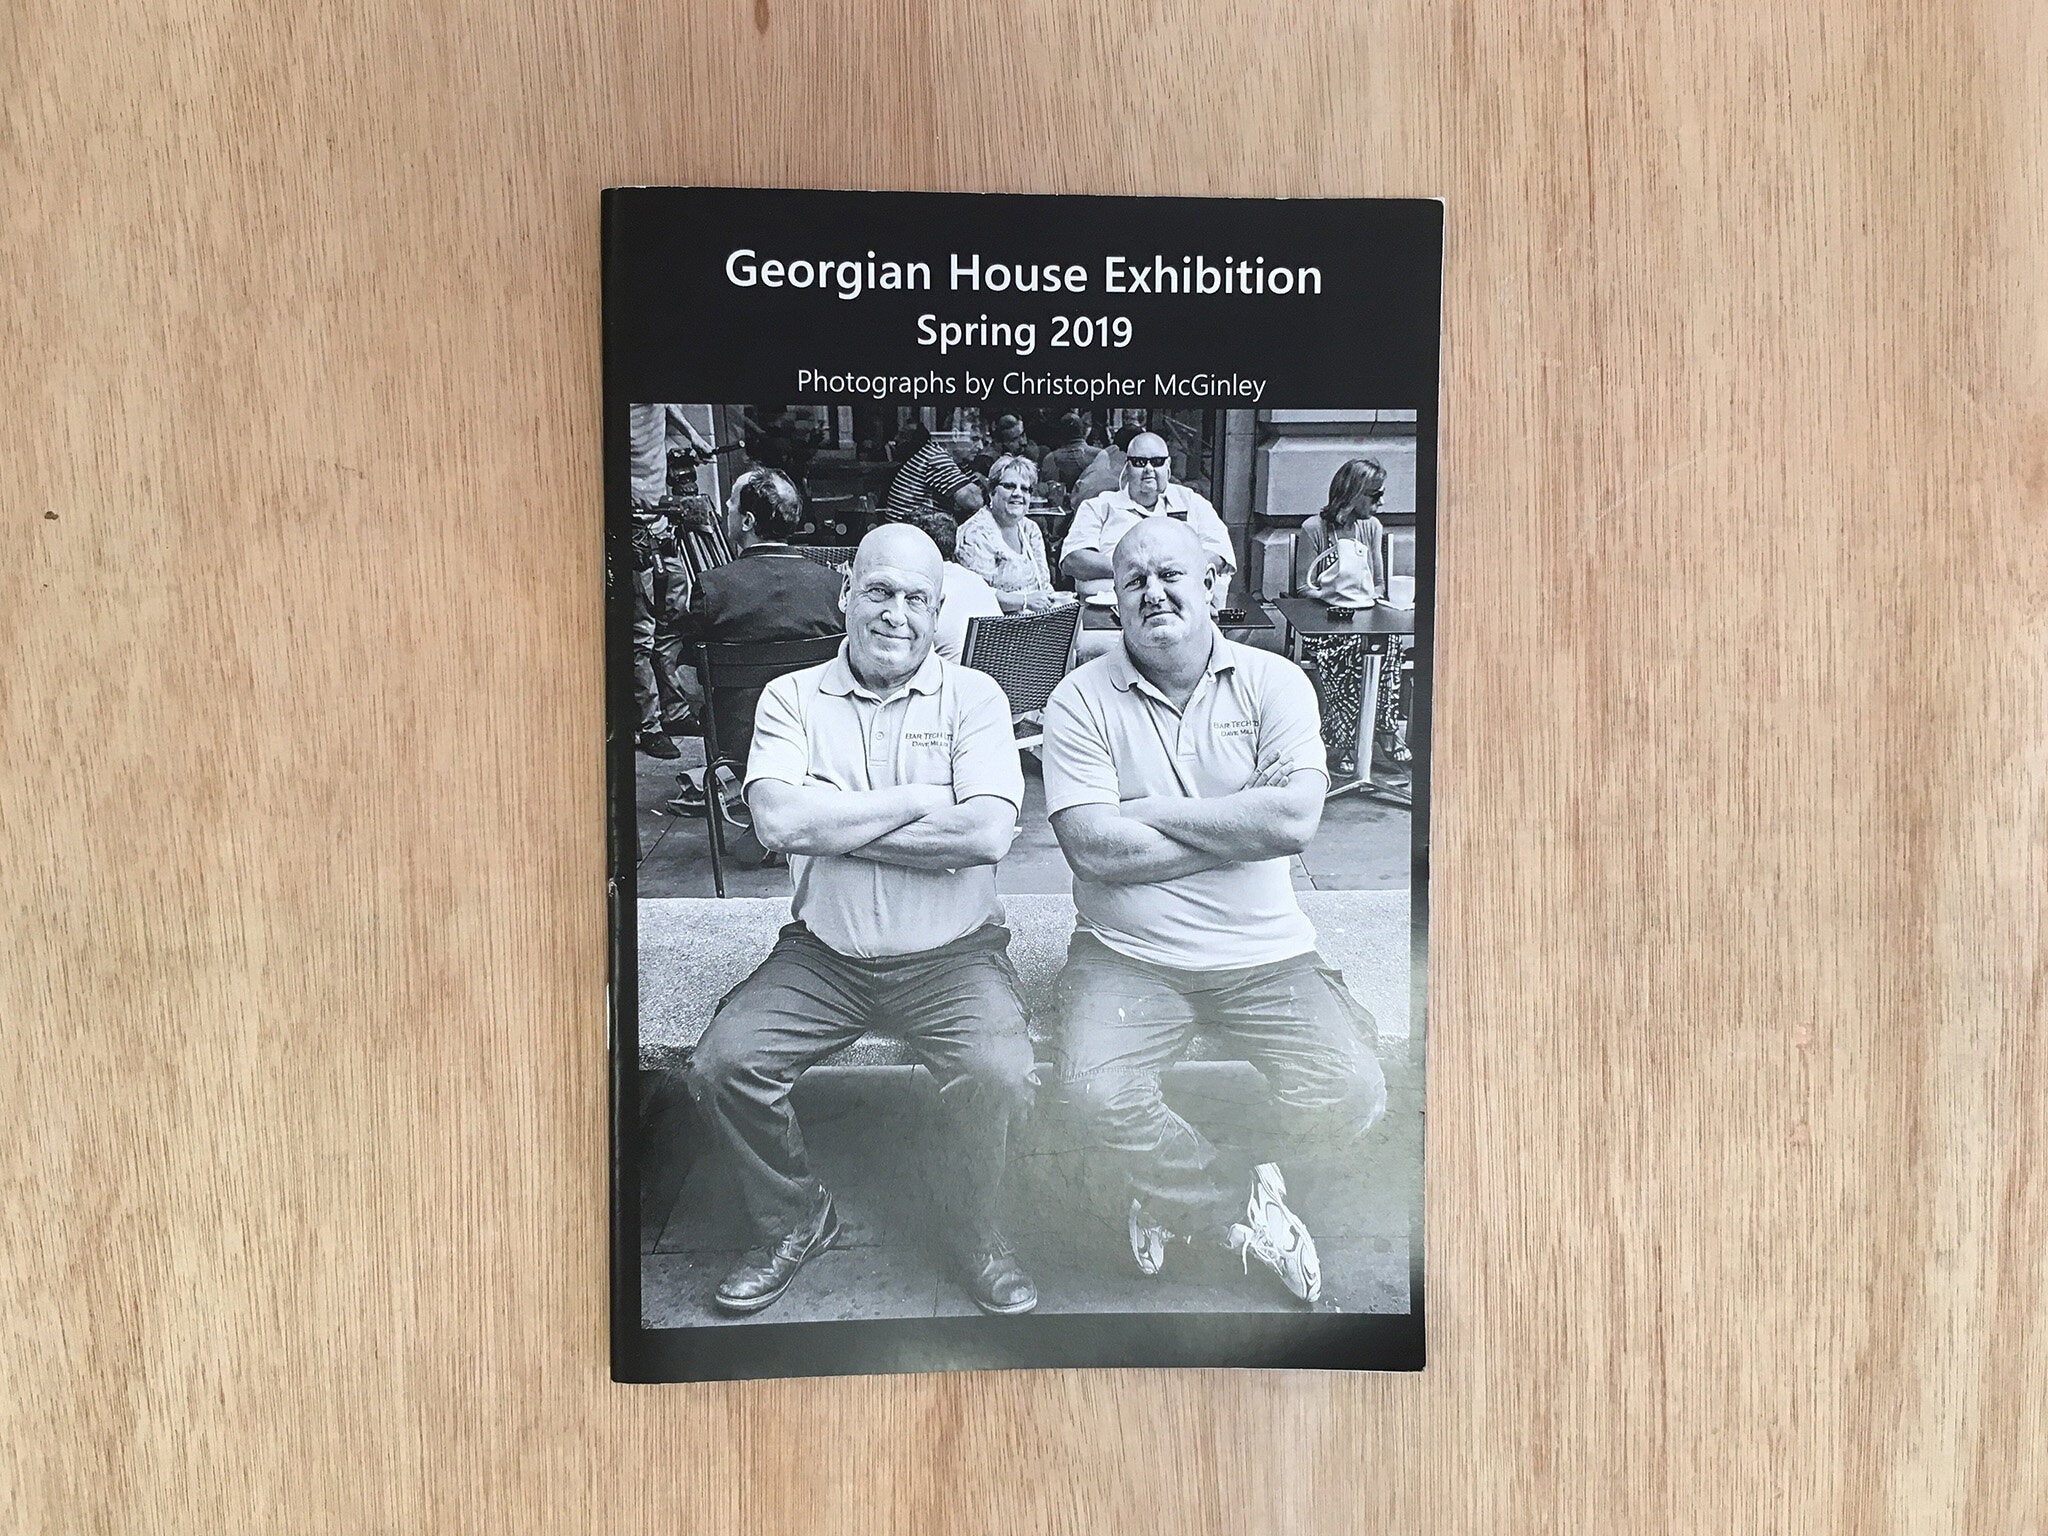 GEORGIAN HOUSE EXHIBITION - SPRING 2019 by Christopher McGinley